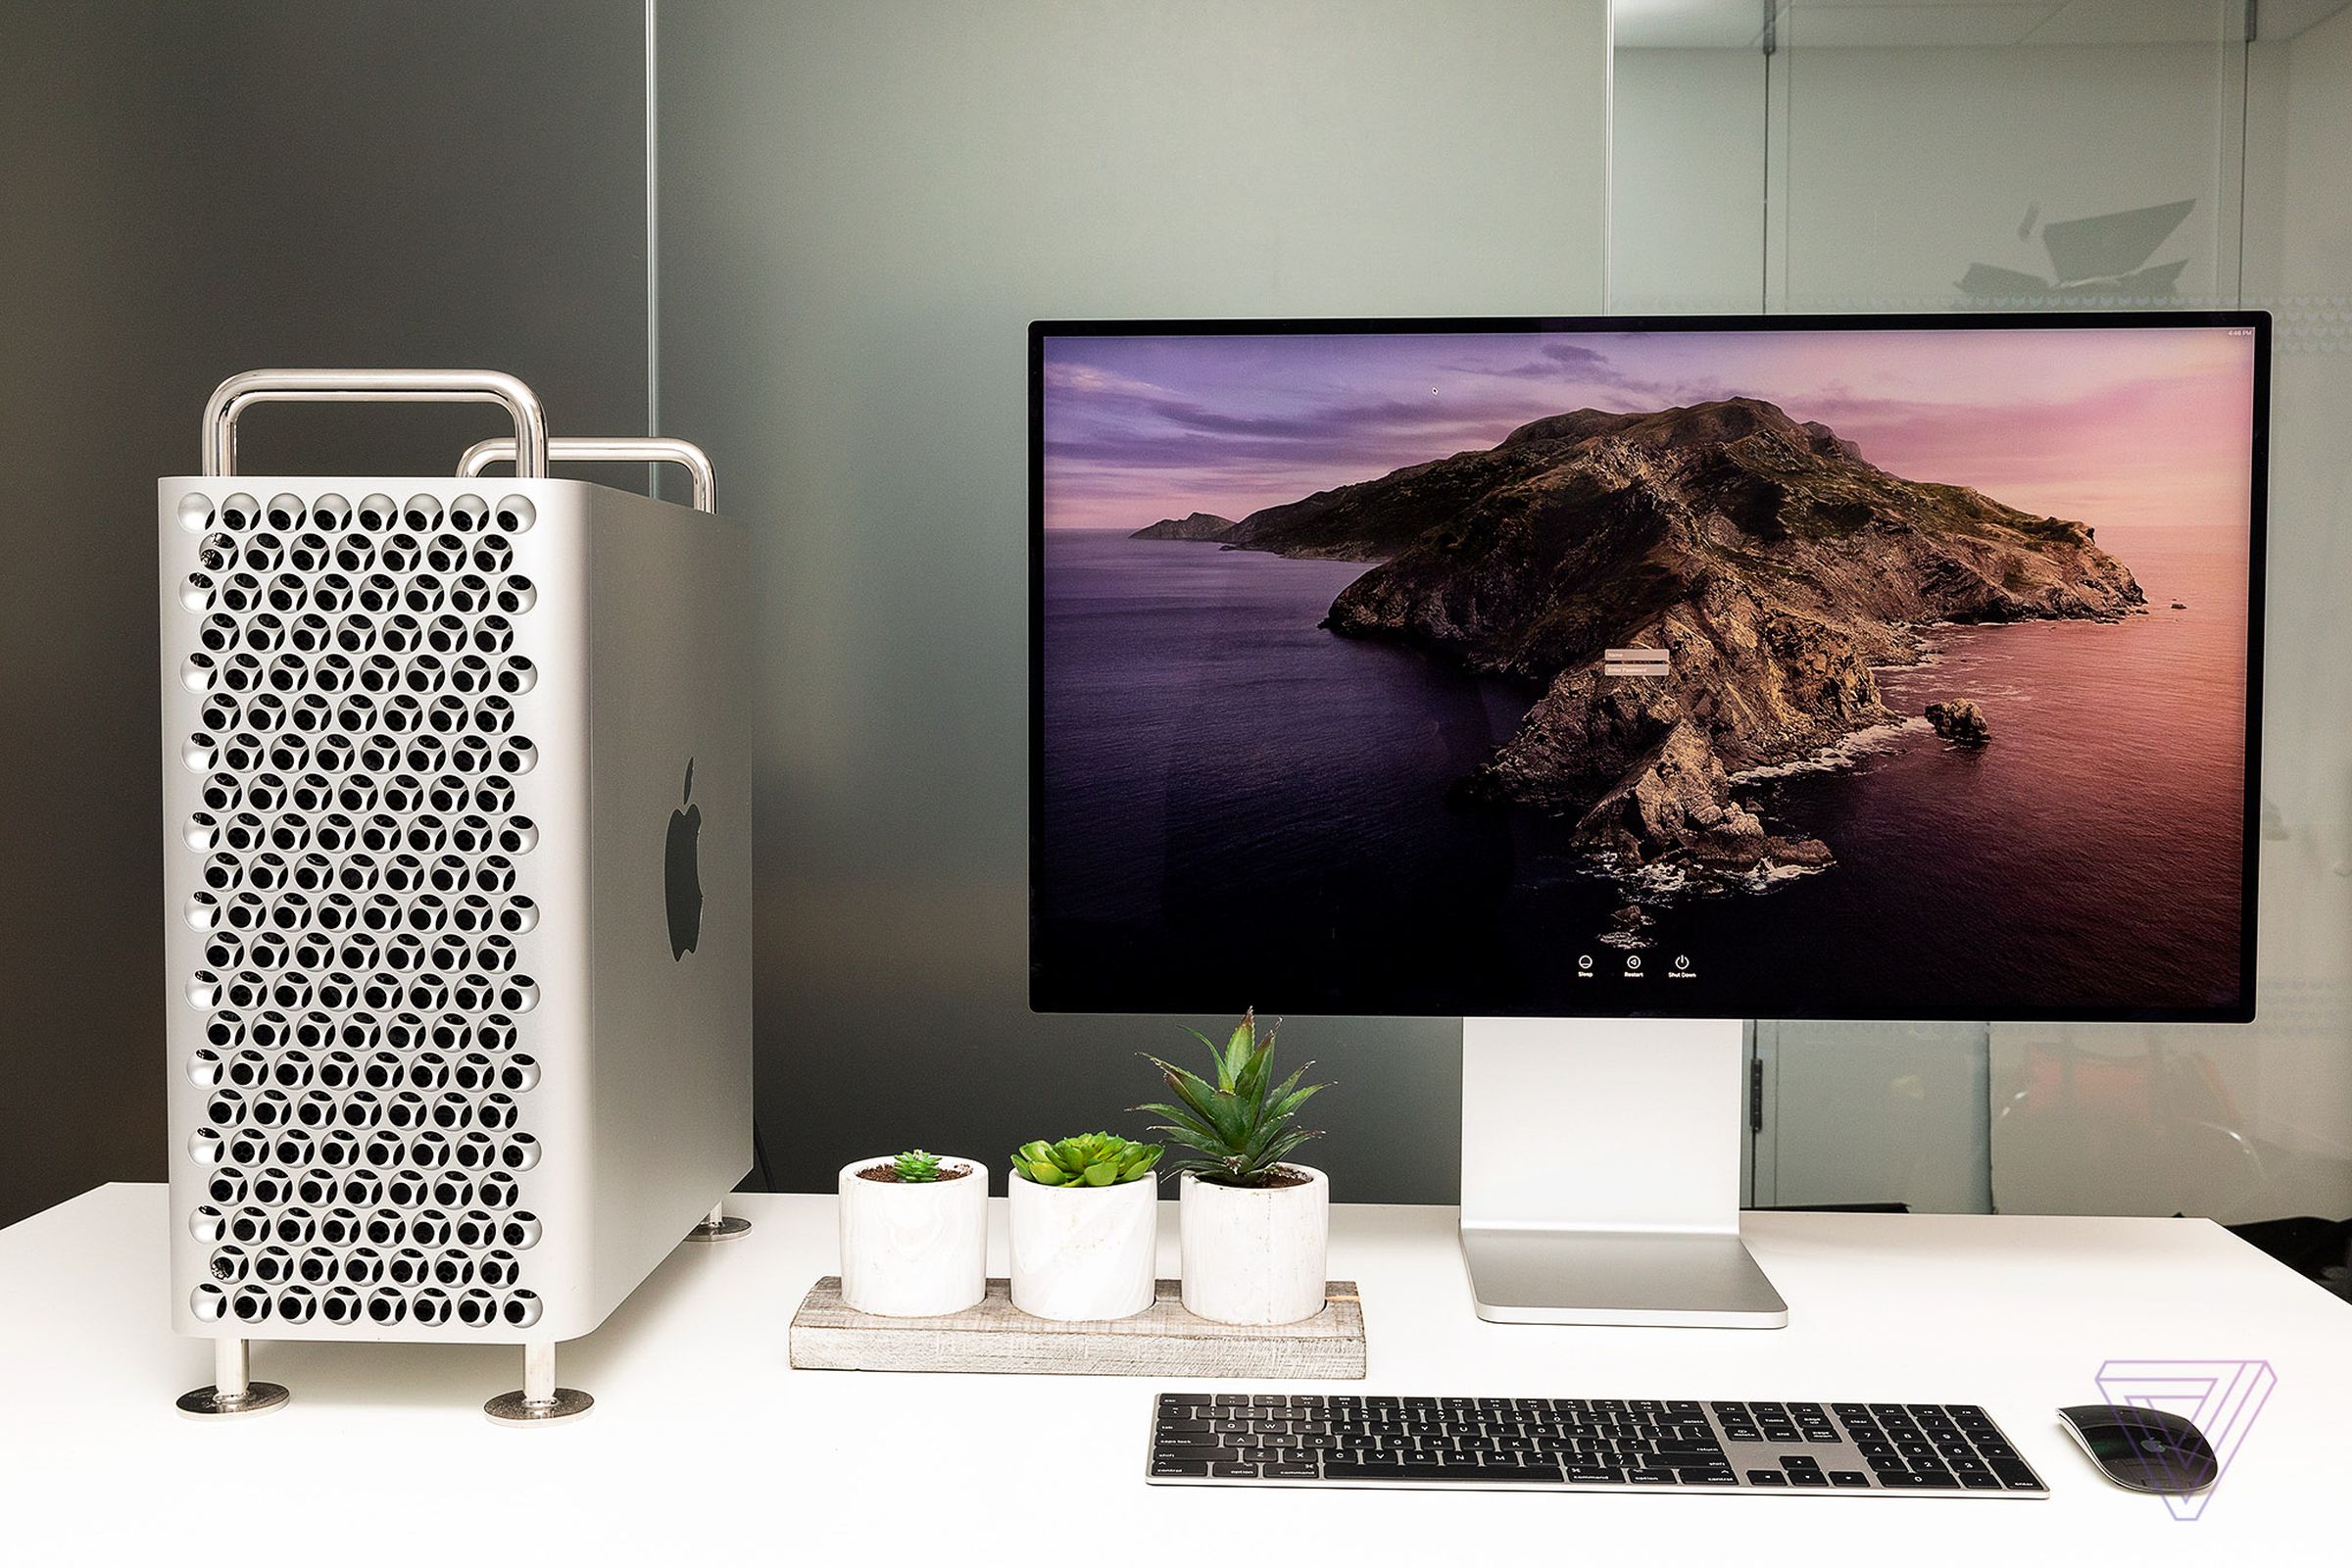 The Mac Pro is now Apple’s last machine with an Intel chip